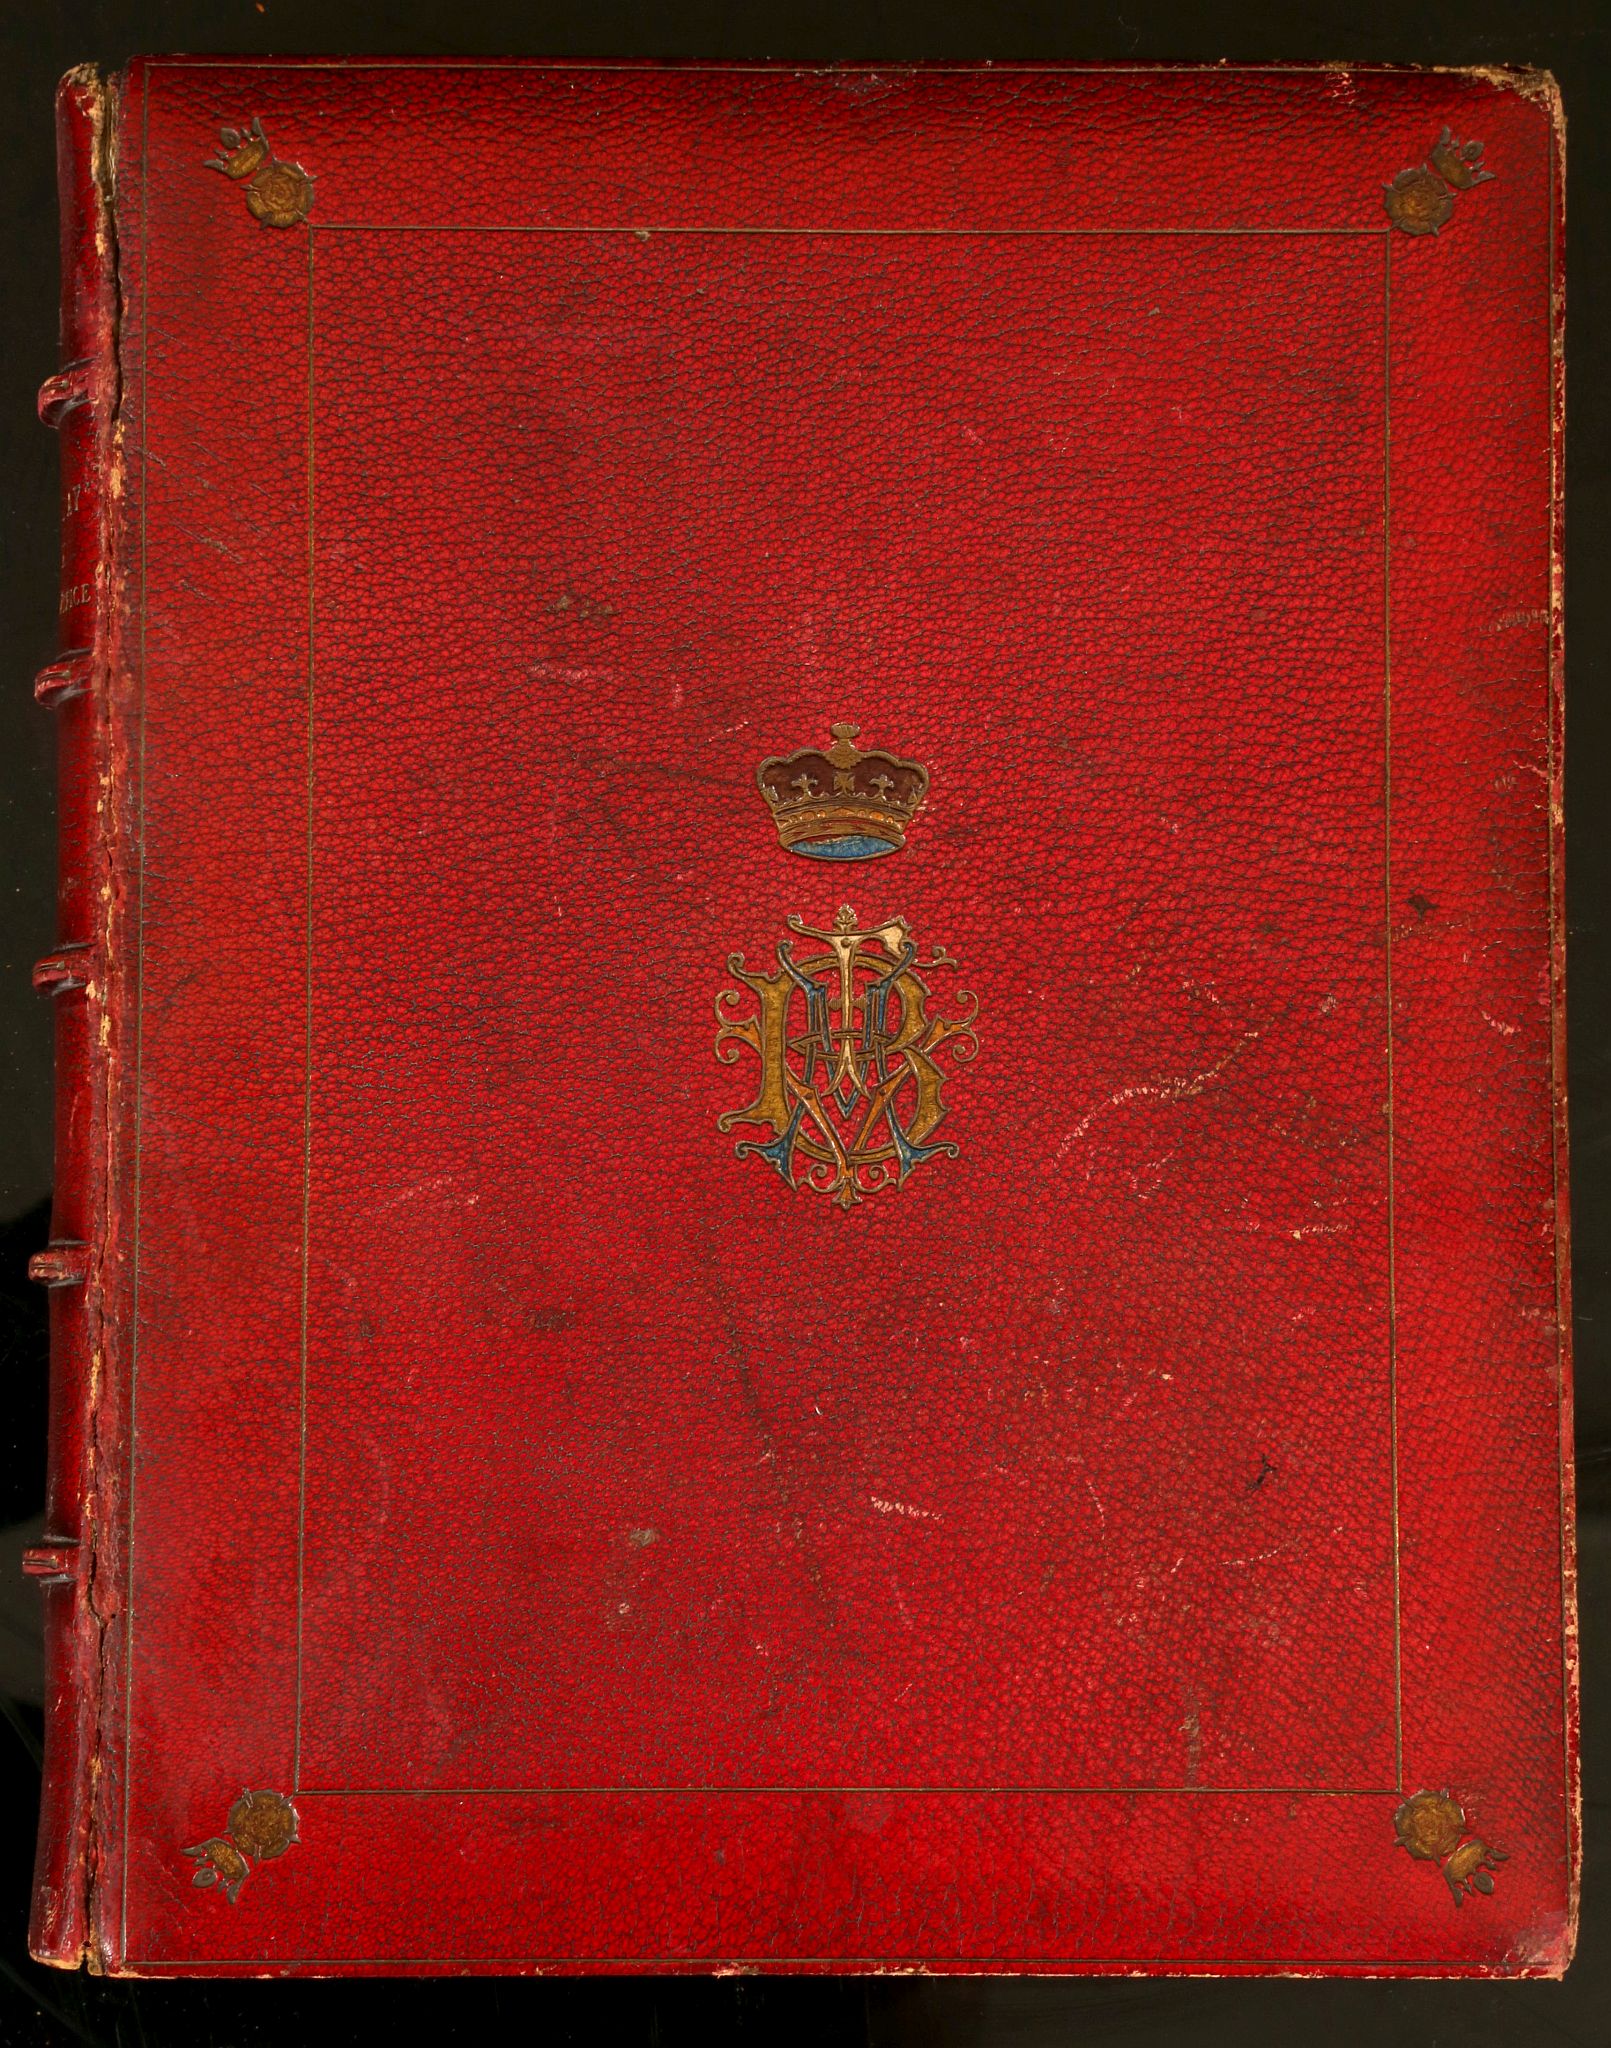 BEATRICE, Princess (1857-1944). A Birthday Book. Designed by Her Royal Highness the Princess